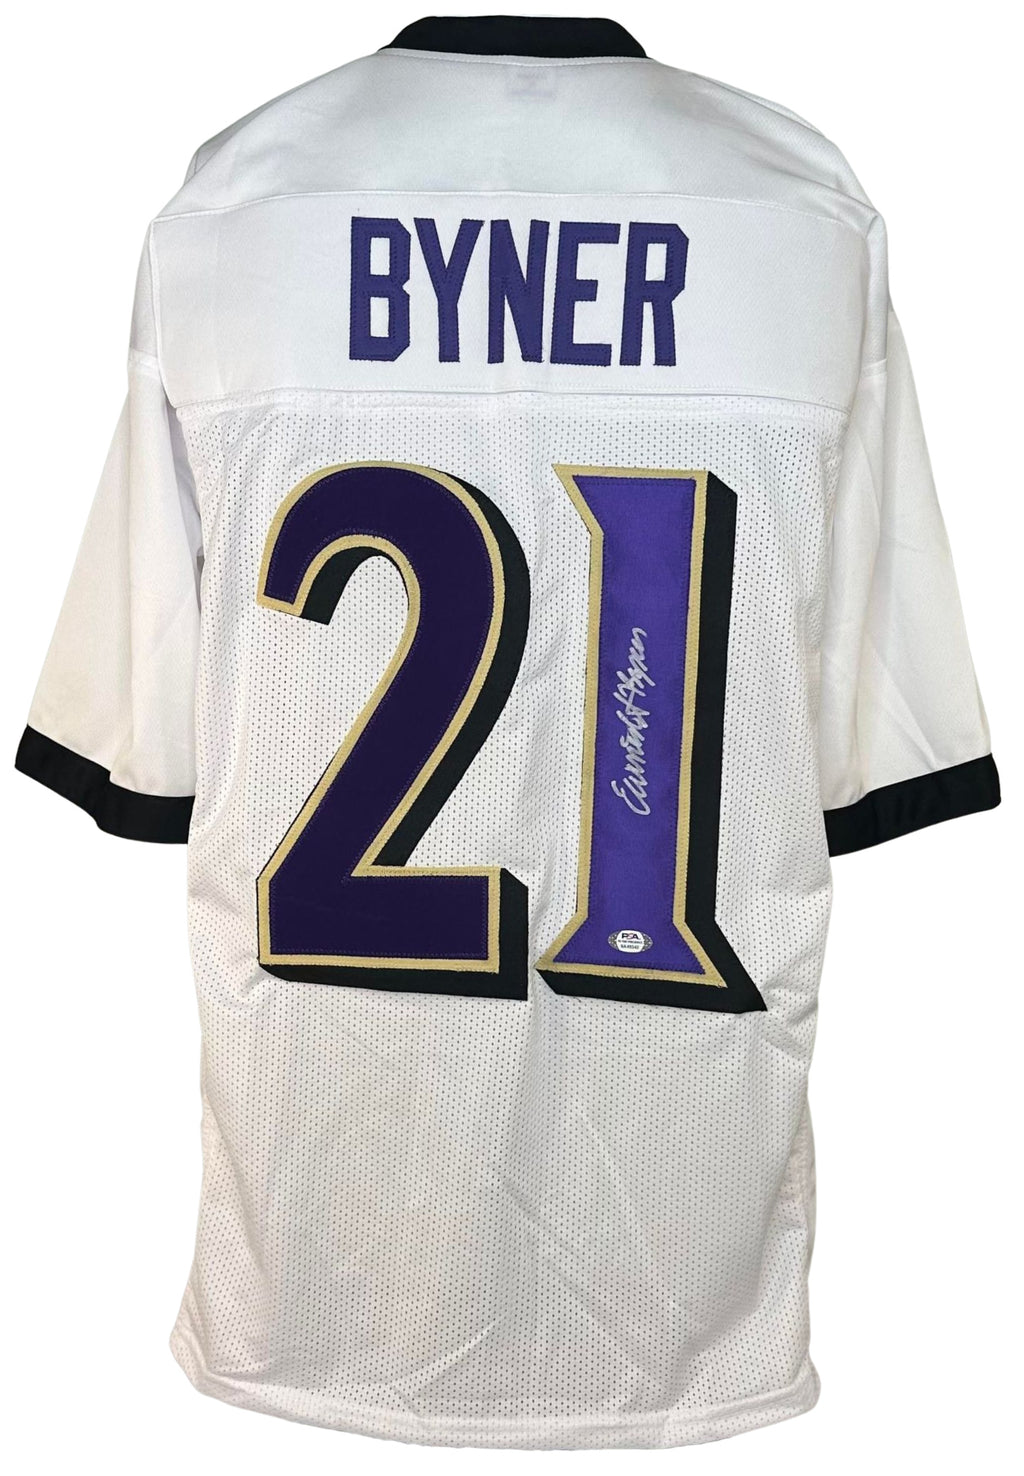 EARNEST BYNER AUTOGRAPHED SIGNED JERSEY WHITE PRO STYLE PSA ITP COA